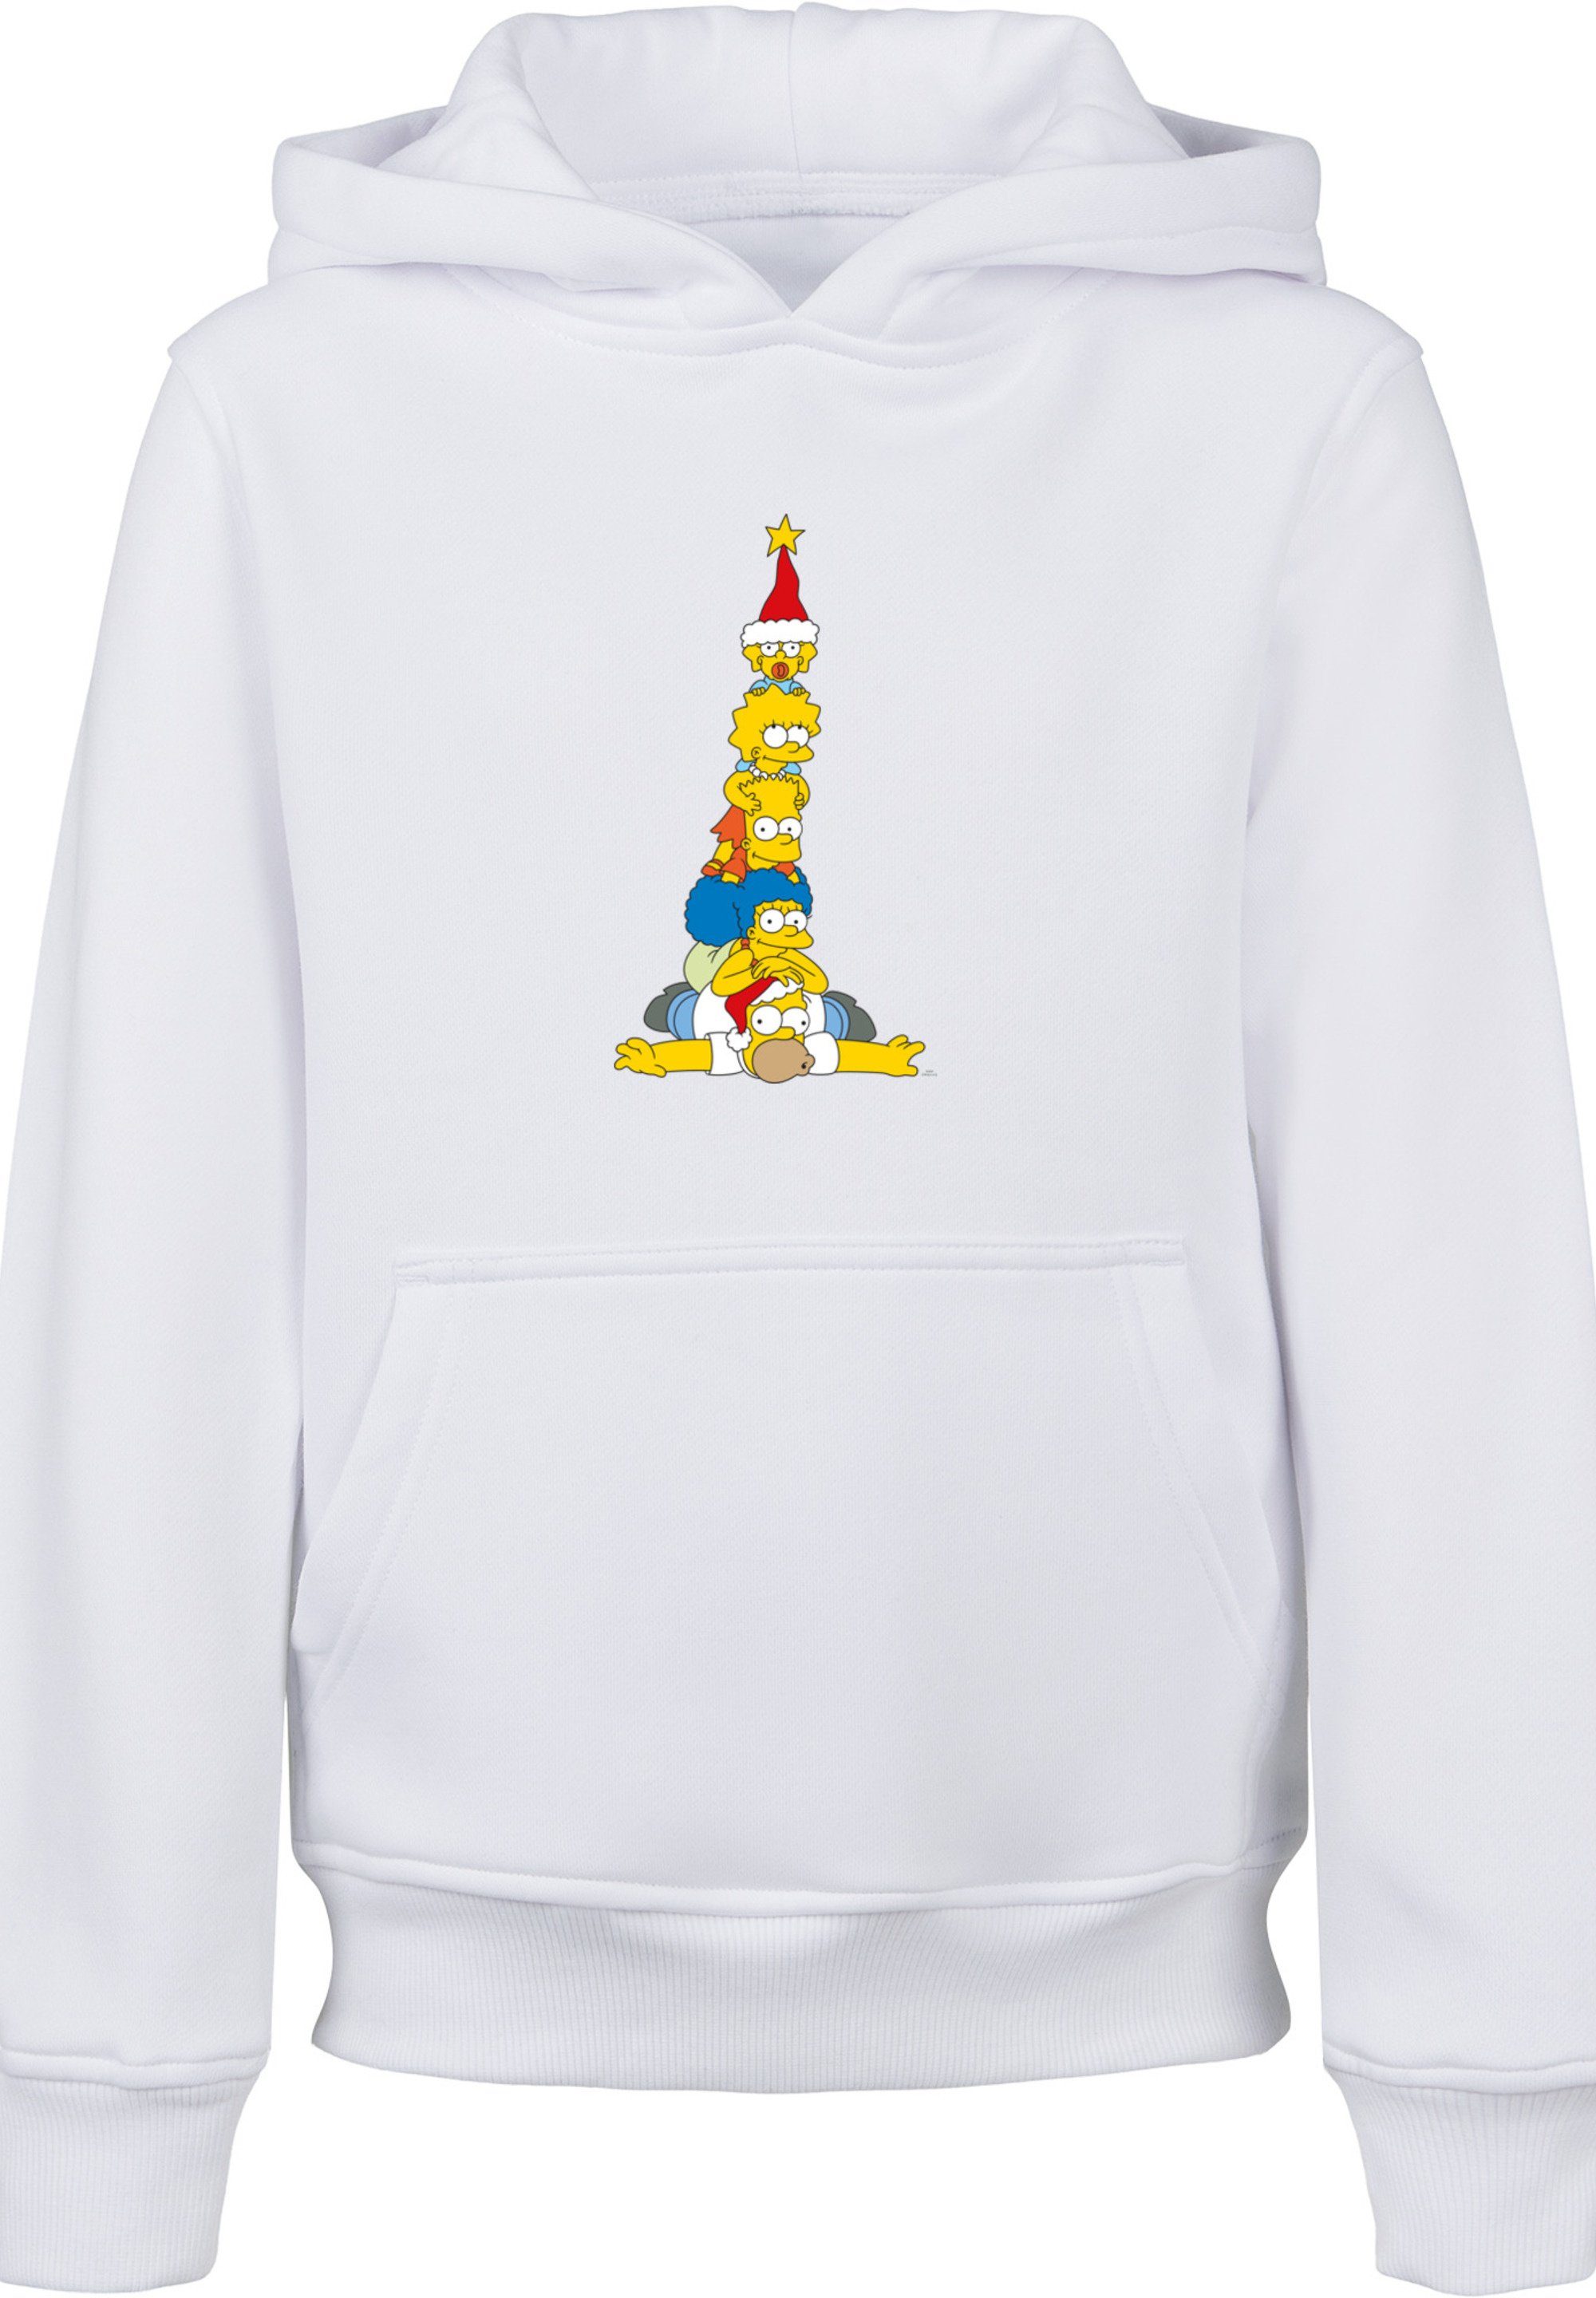 F4NT4STIC Kapuzenpullover The Simpsons Family Weihnachtsbaum weiß Print Christmas